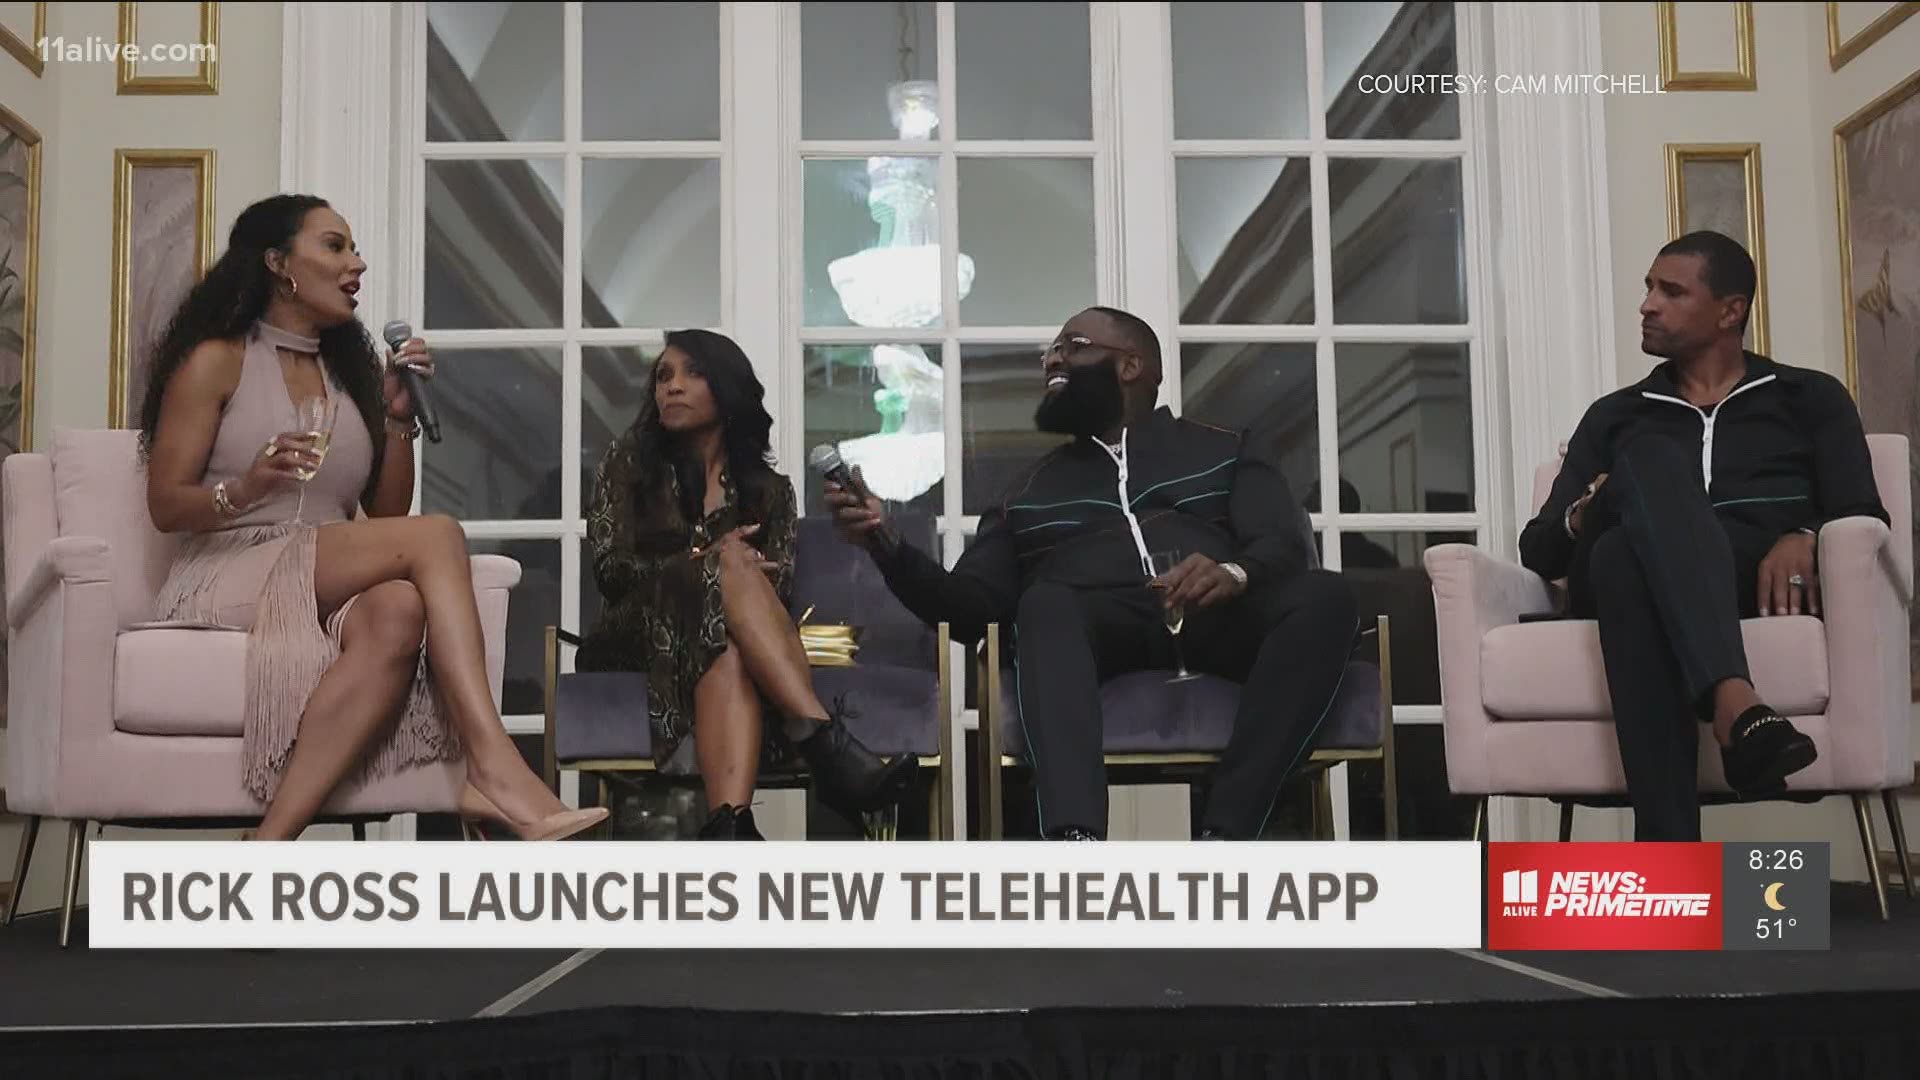 Ross says the app is designed to make medical care and prescriptions easier and faster virtually.